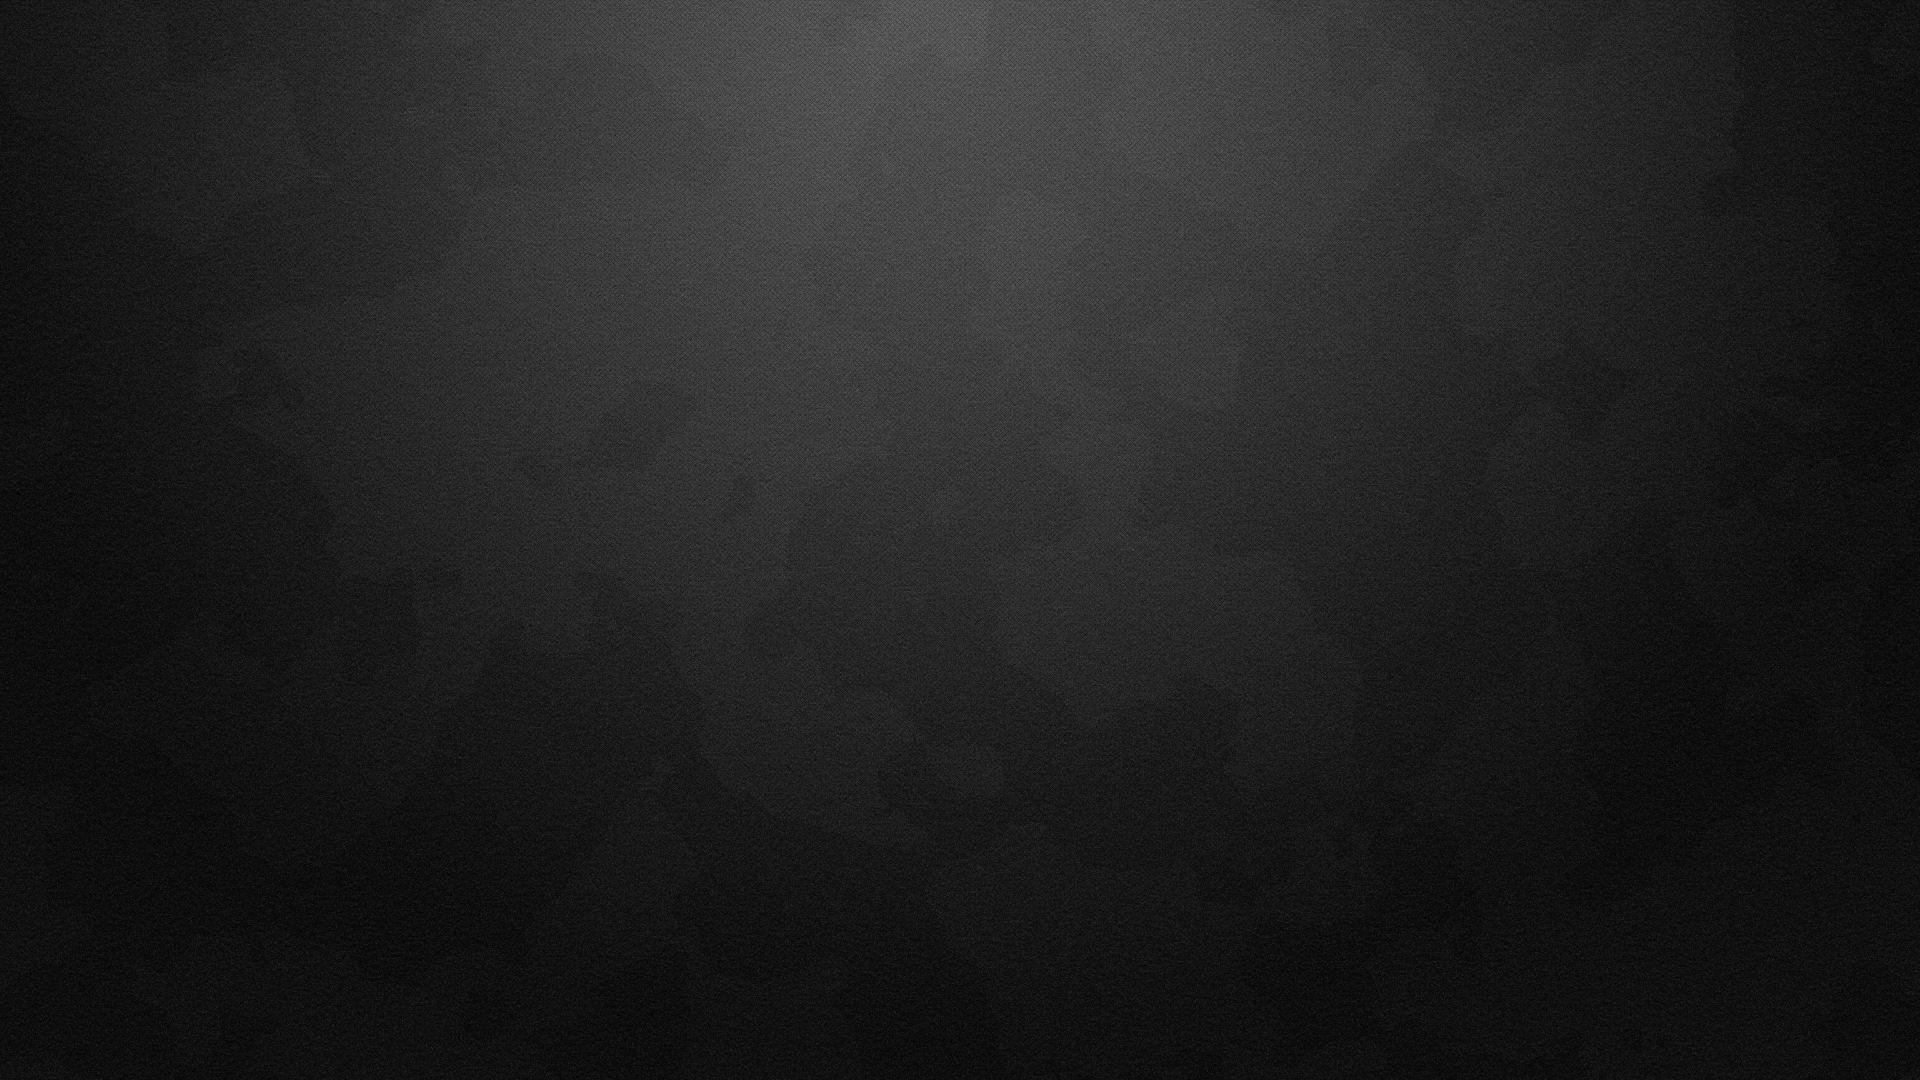 Grey Textured Fade Wallpaper For Phones And Tablets